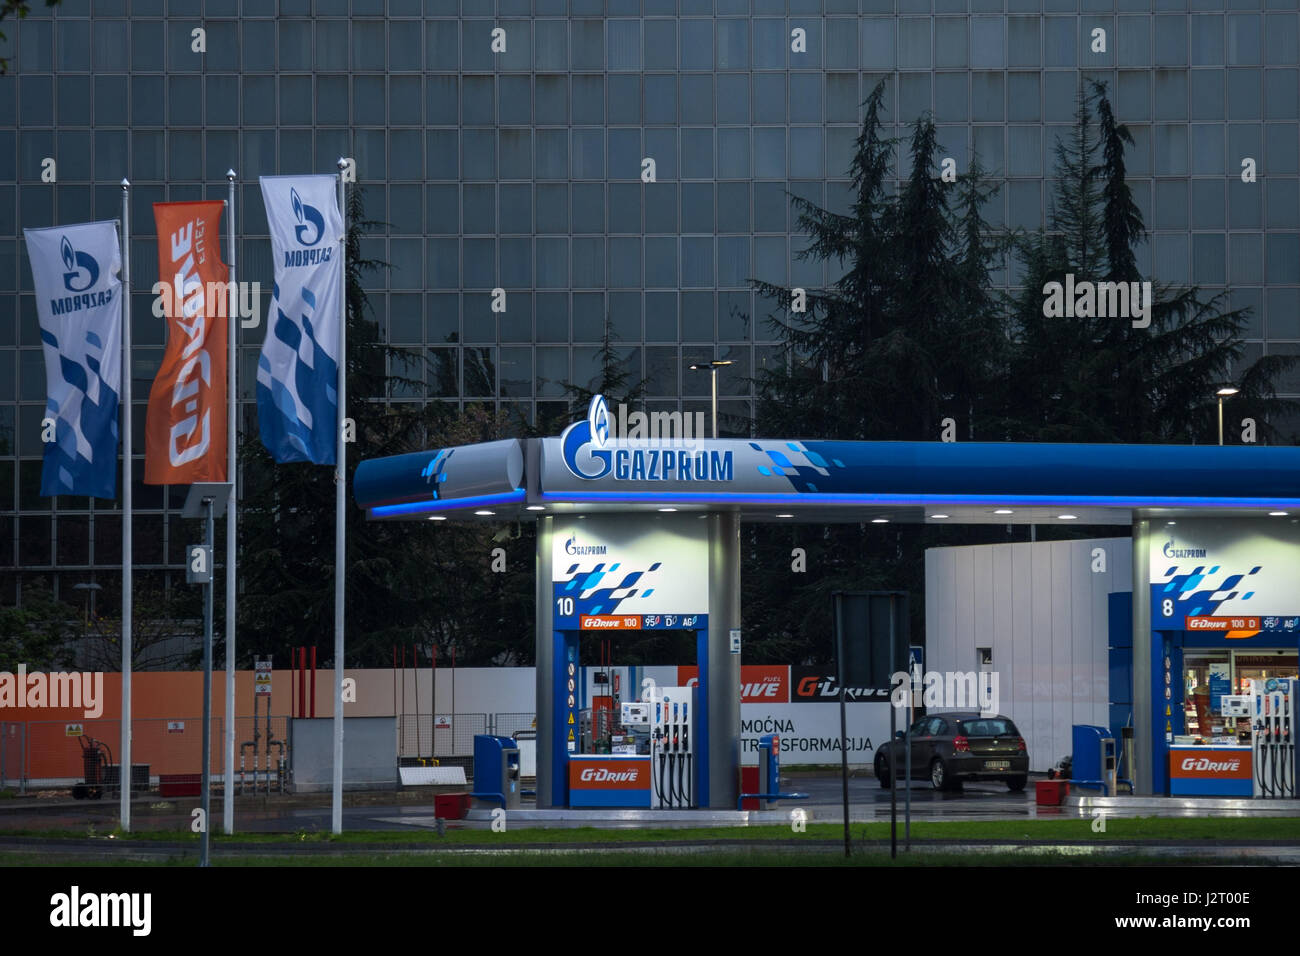 BELGRADE, SERBIA - APRIL 29, 2017: Gazprom gas station in front of their headquarters for Serbia. Gazprom is one of the main power and energy companie Stock Photo